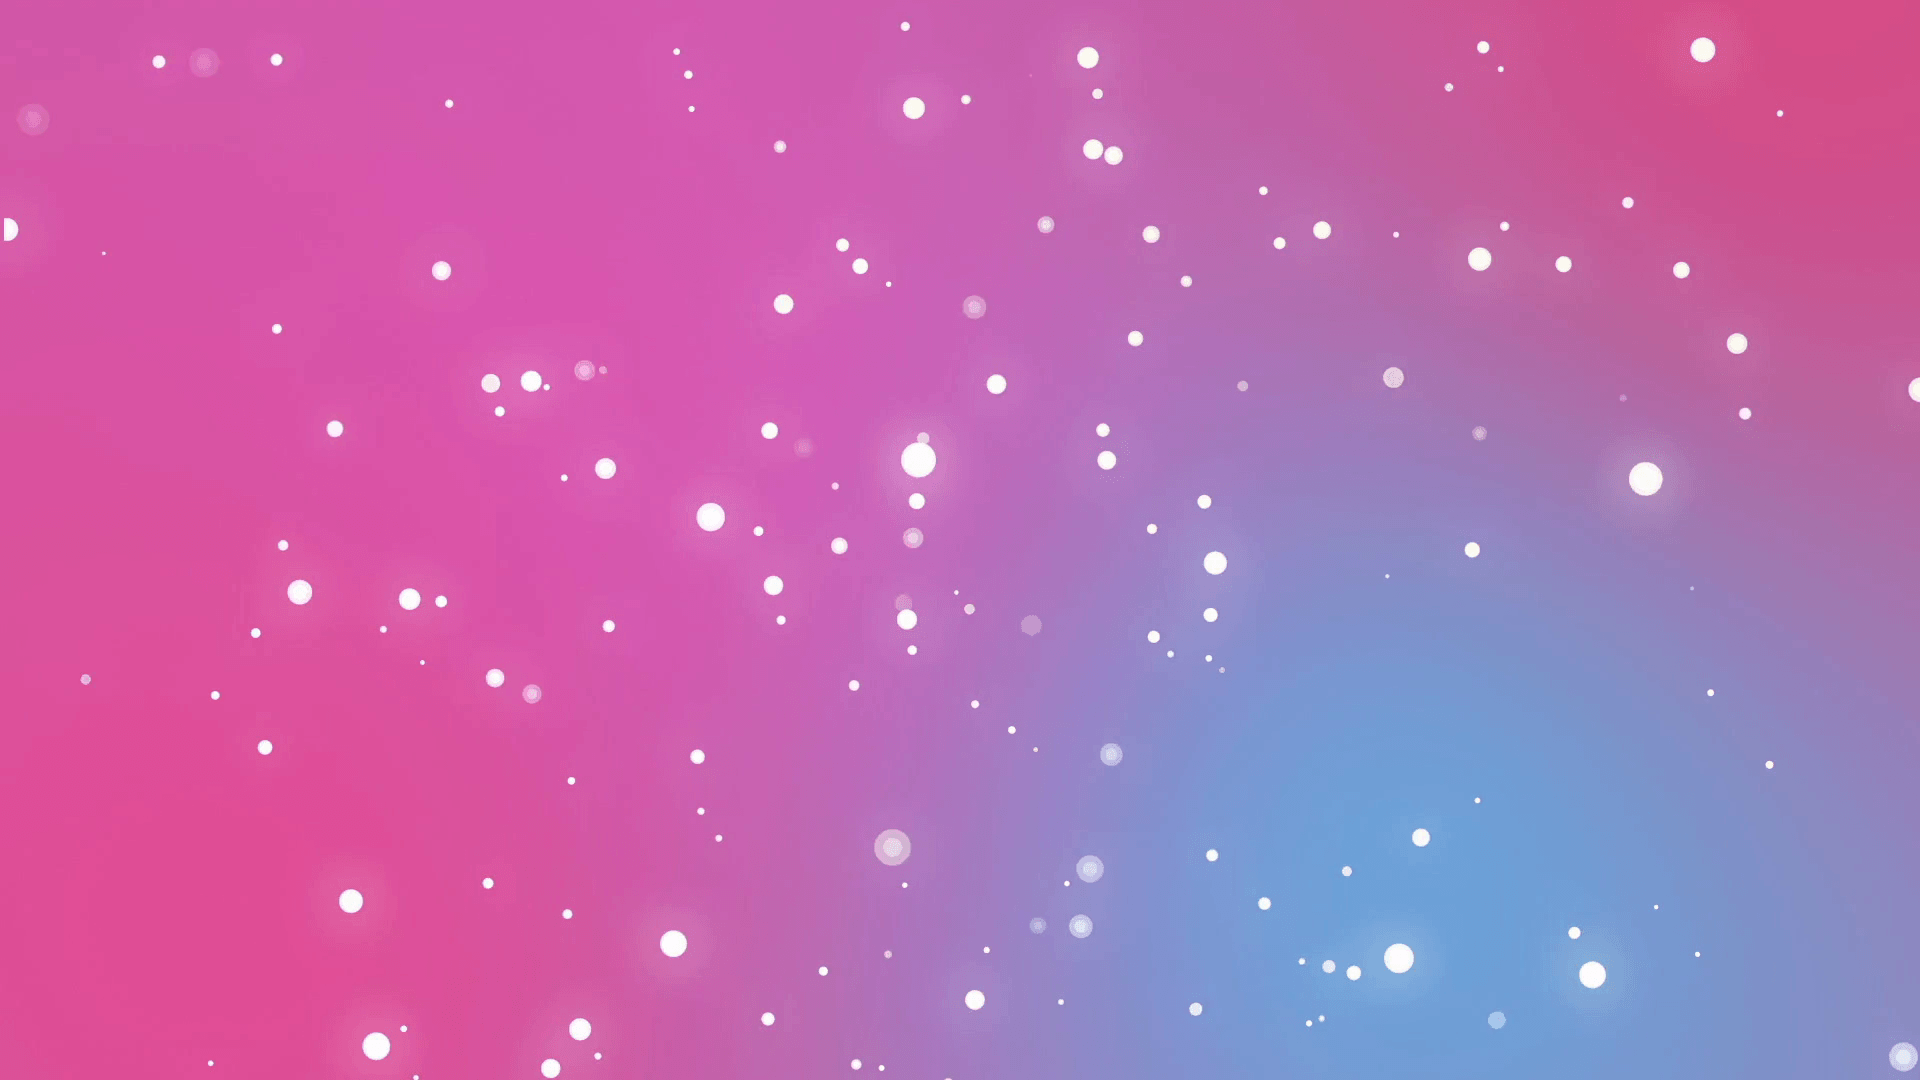 Cute romantic pink blue background with moving sparkling light dot